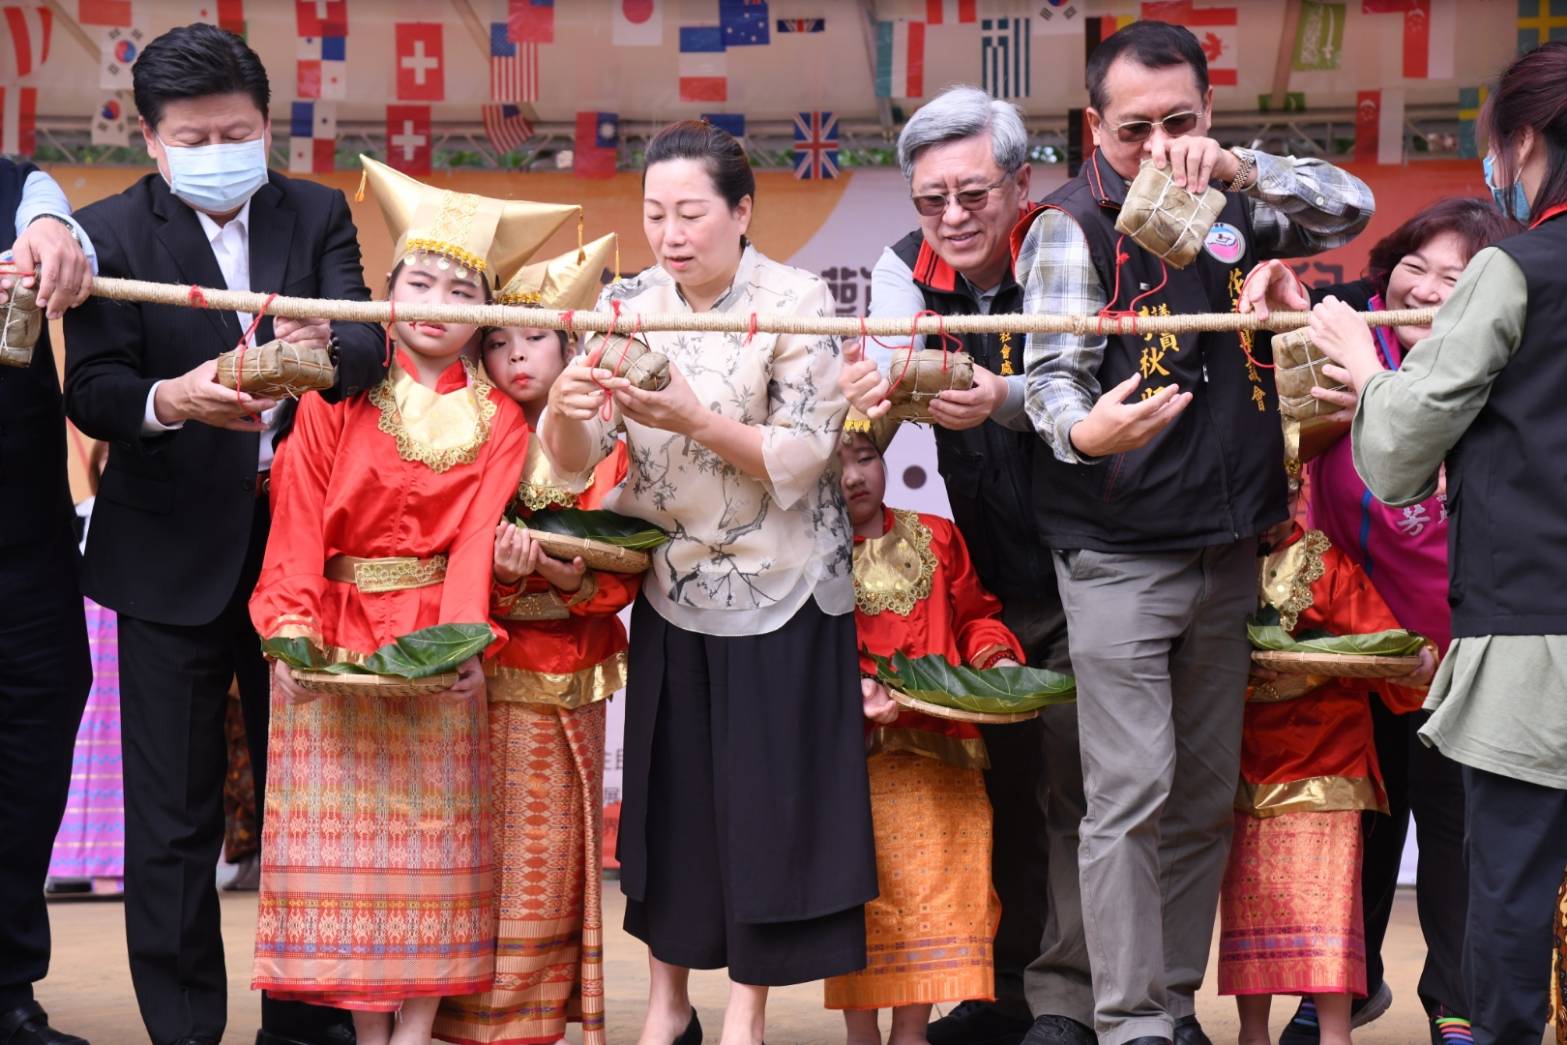 The new immigrants of the county showed warmth and enthusiasm and enjoyed the event together. (Photo / Provided by the Hualien County Government)